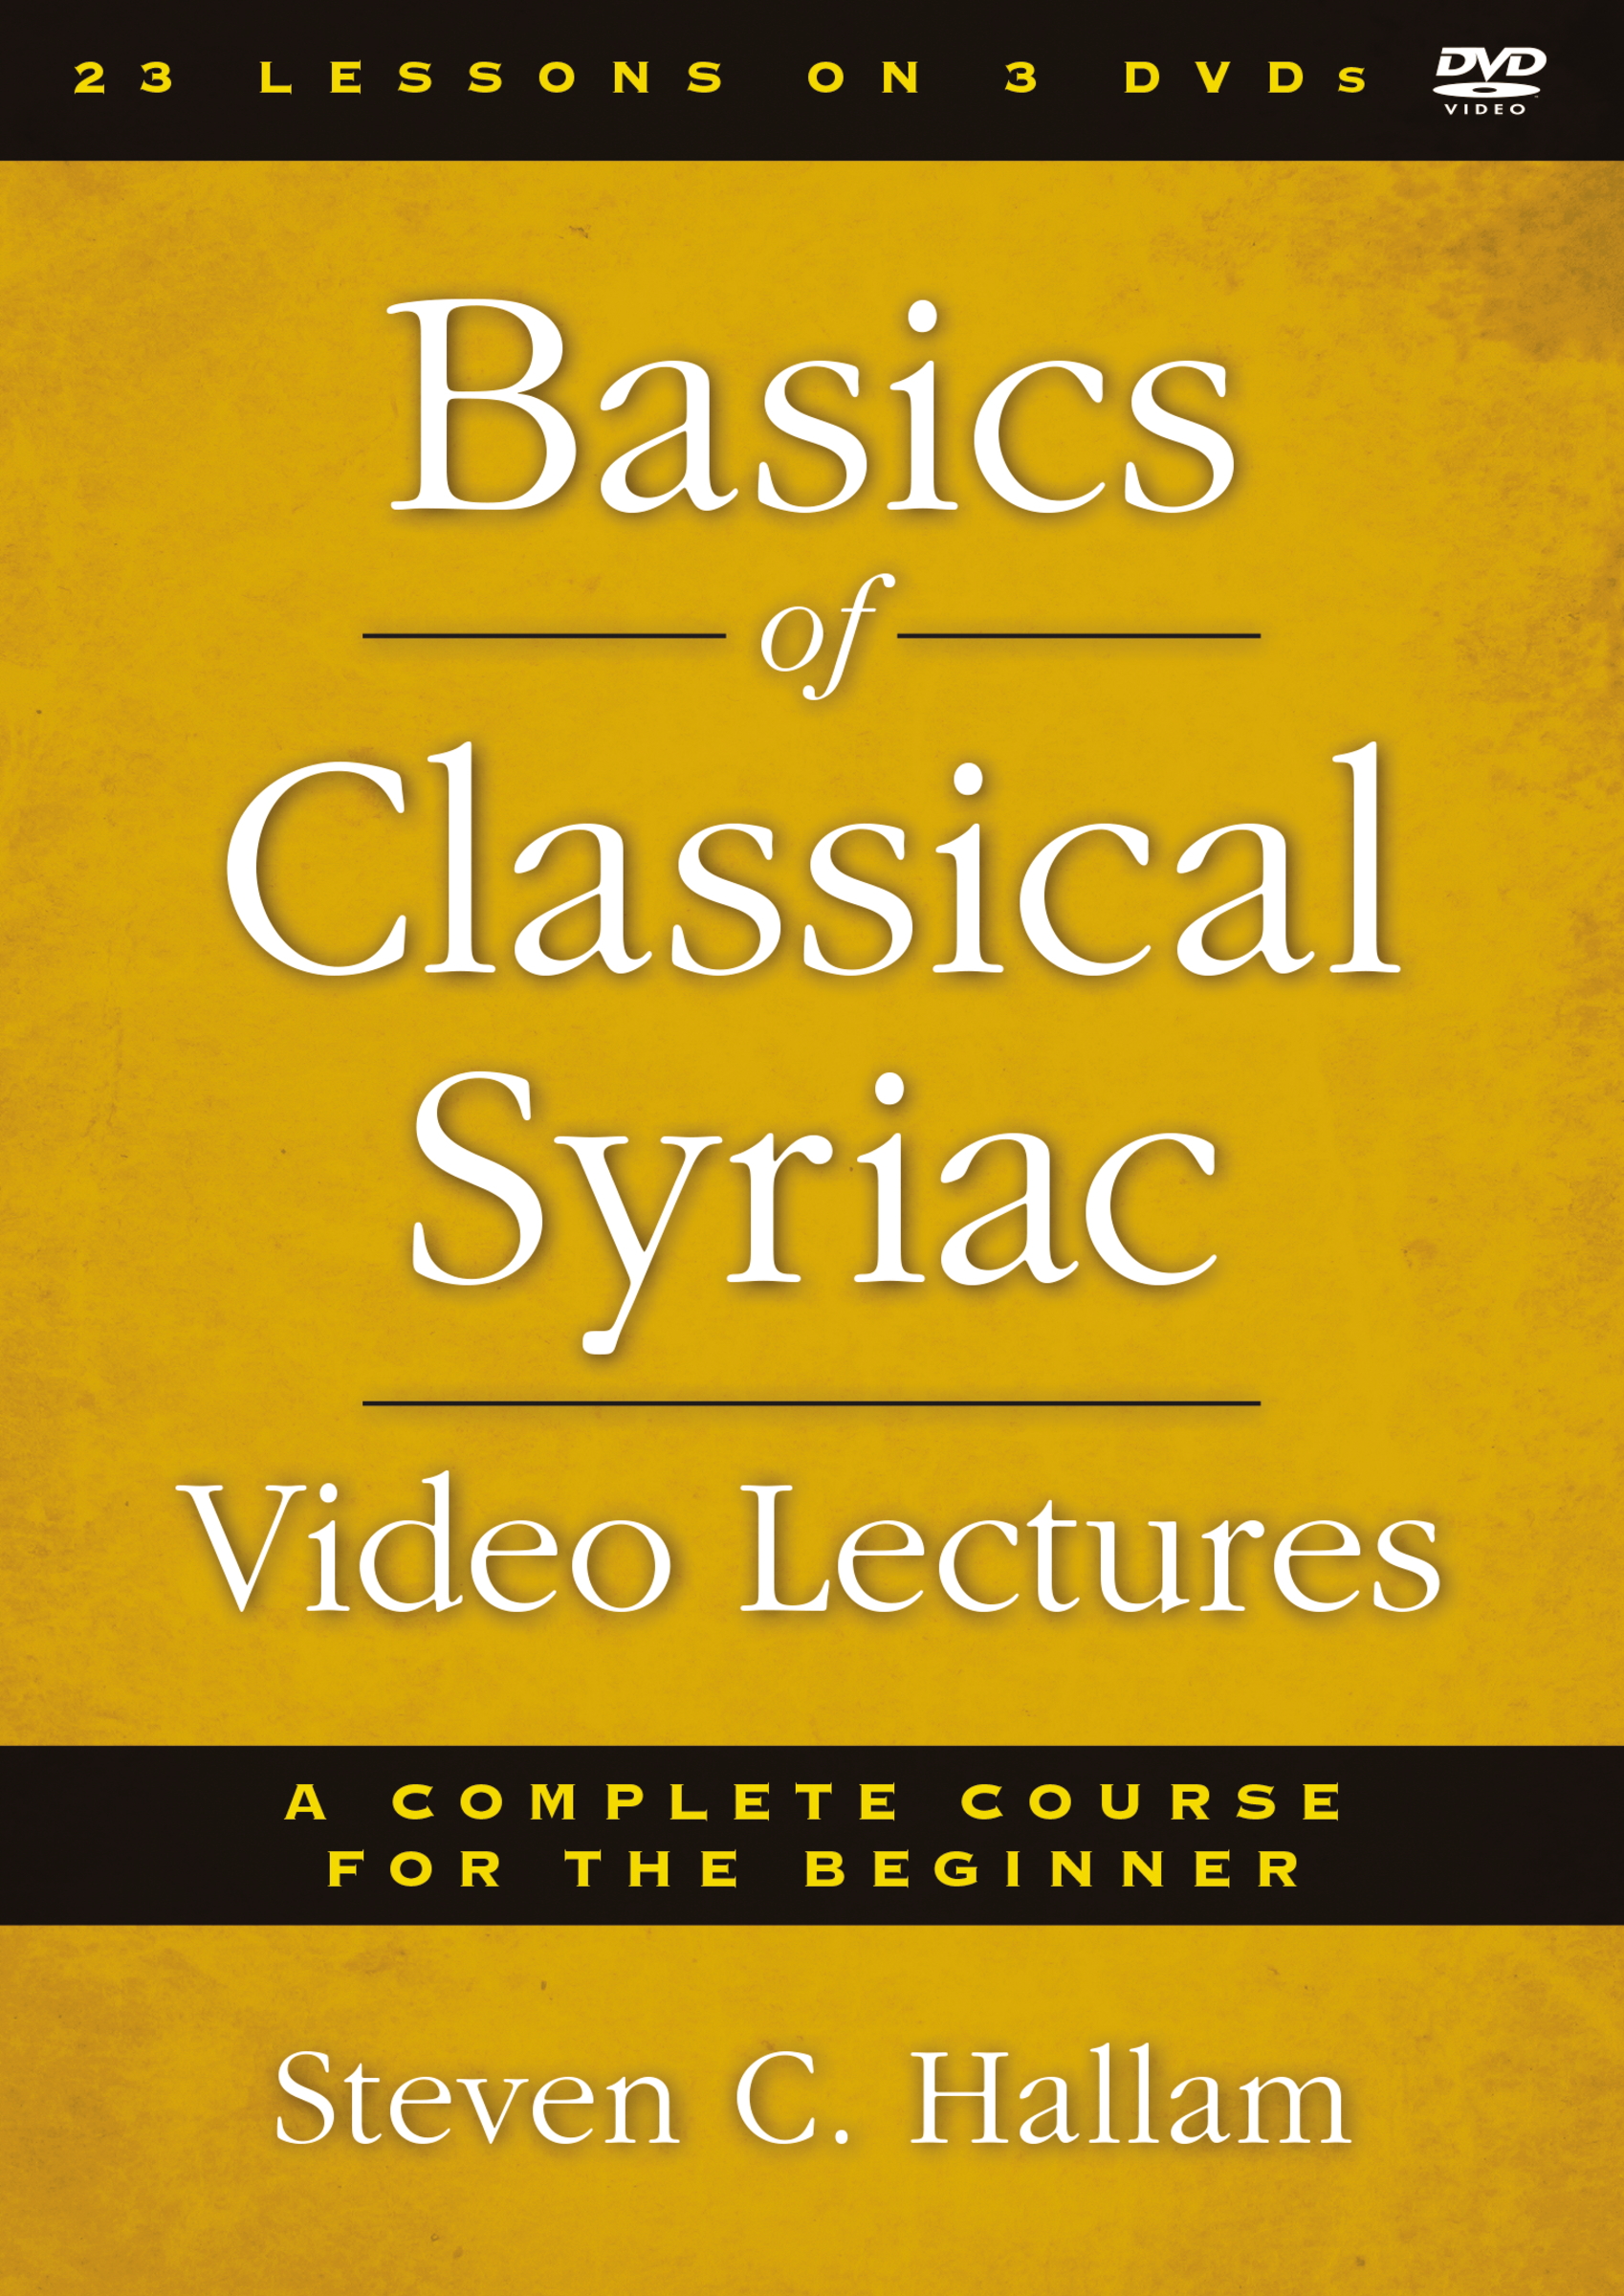 Basics of Classical Syriac Video Lectures